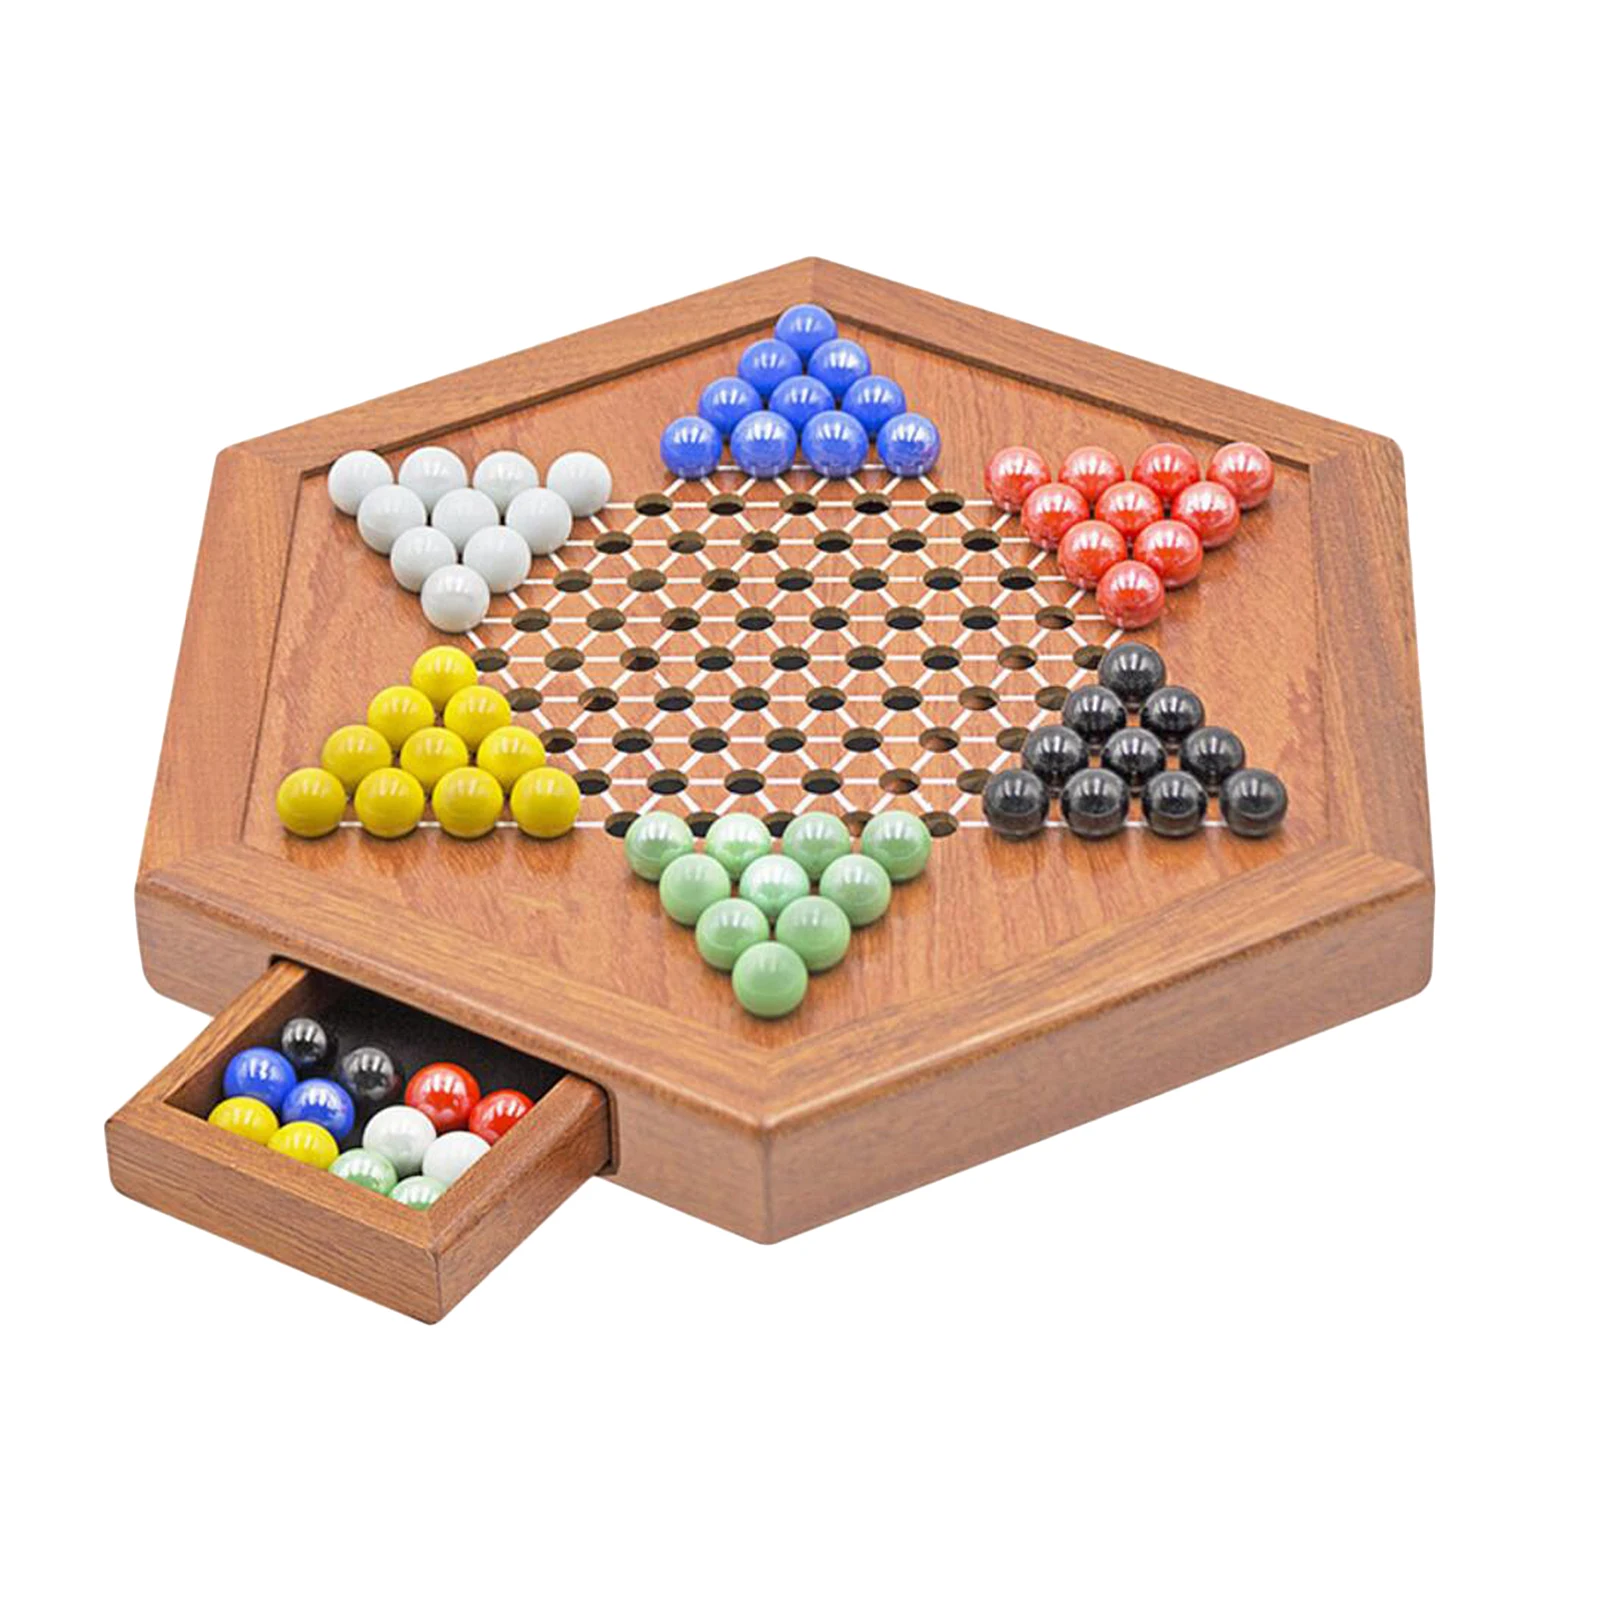 Classic Wooden Chinese Checkers 12 Inches with Drawers Halma Board Game Fine